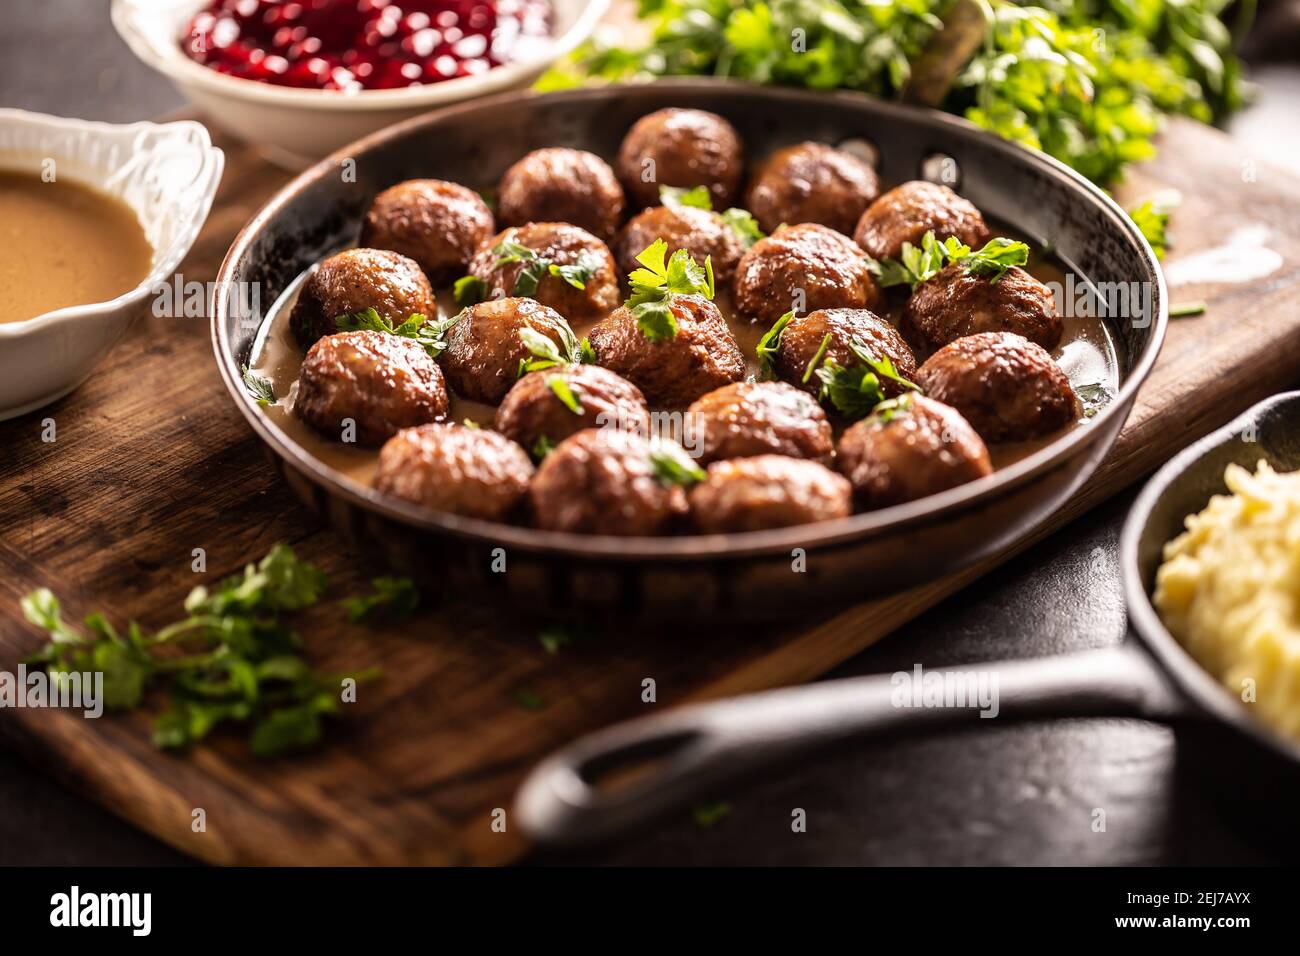 Swedish meatballs, kottbullar, in a pan topped with fresh parsley. Stock Photo